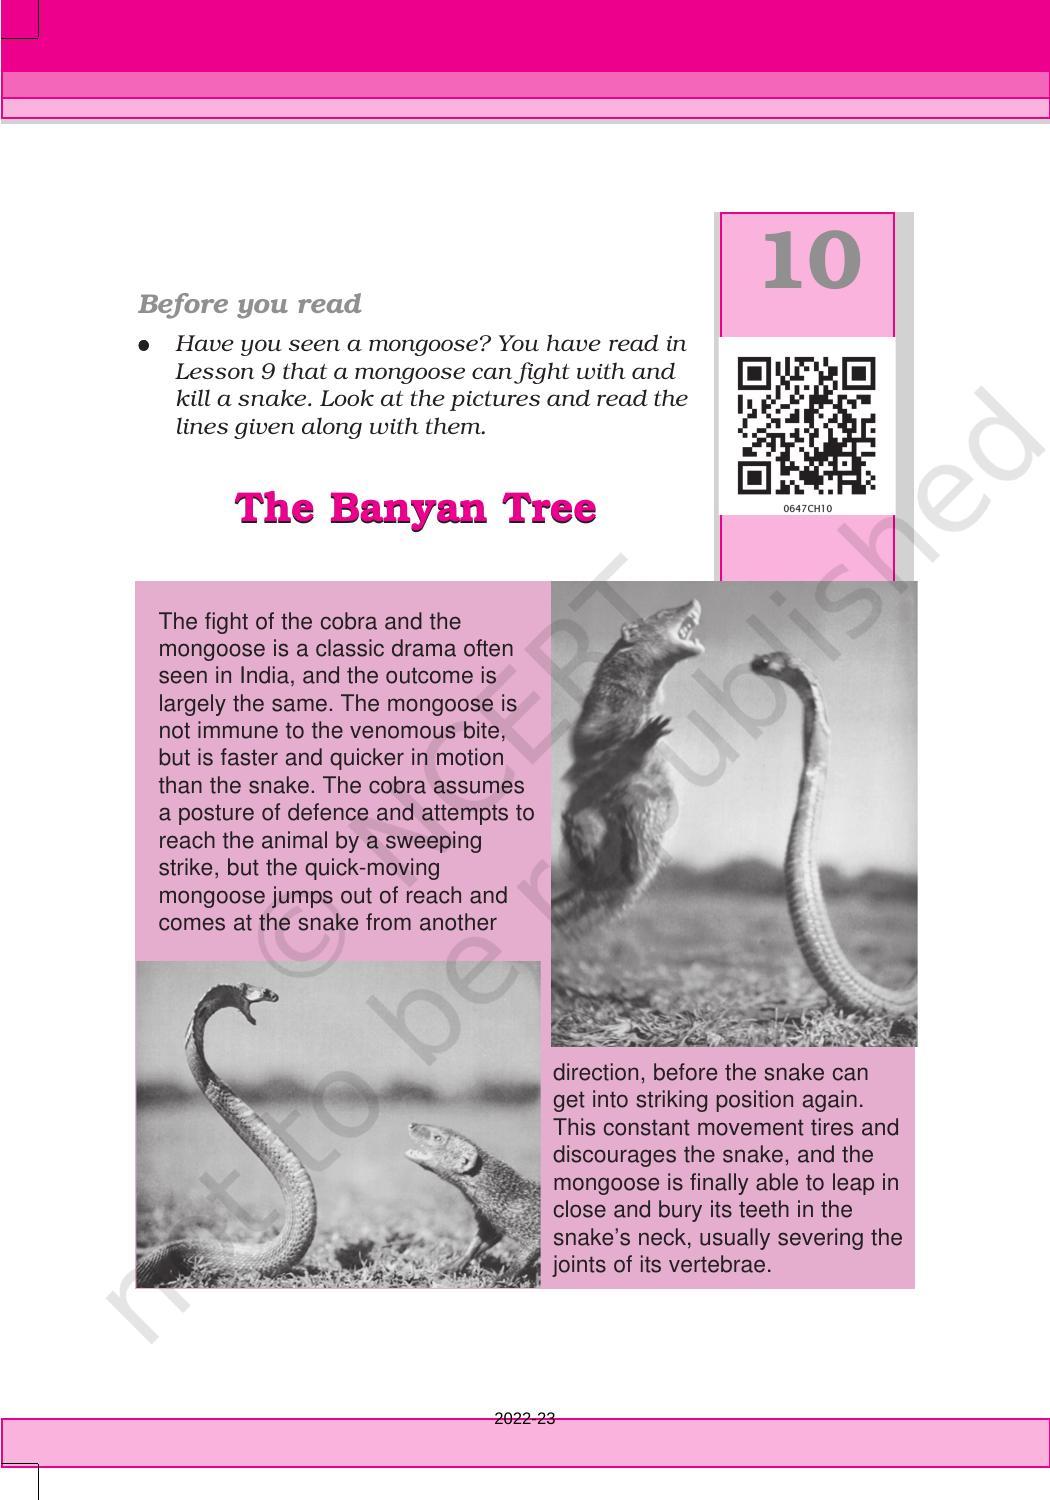 NCERT Book for Class 6 English(Honeysuckle) : Chapter 10-The Banyan Tree - Page 1